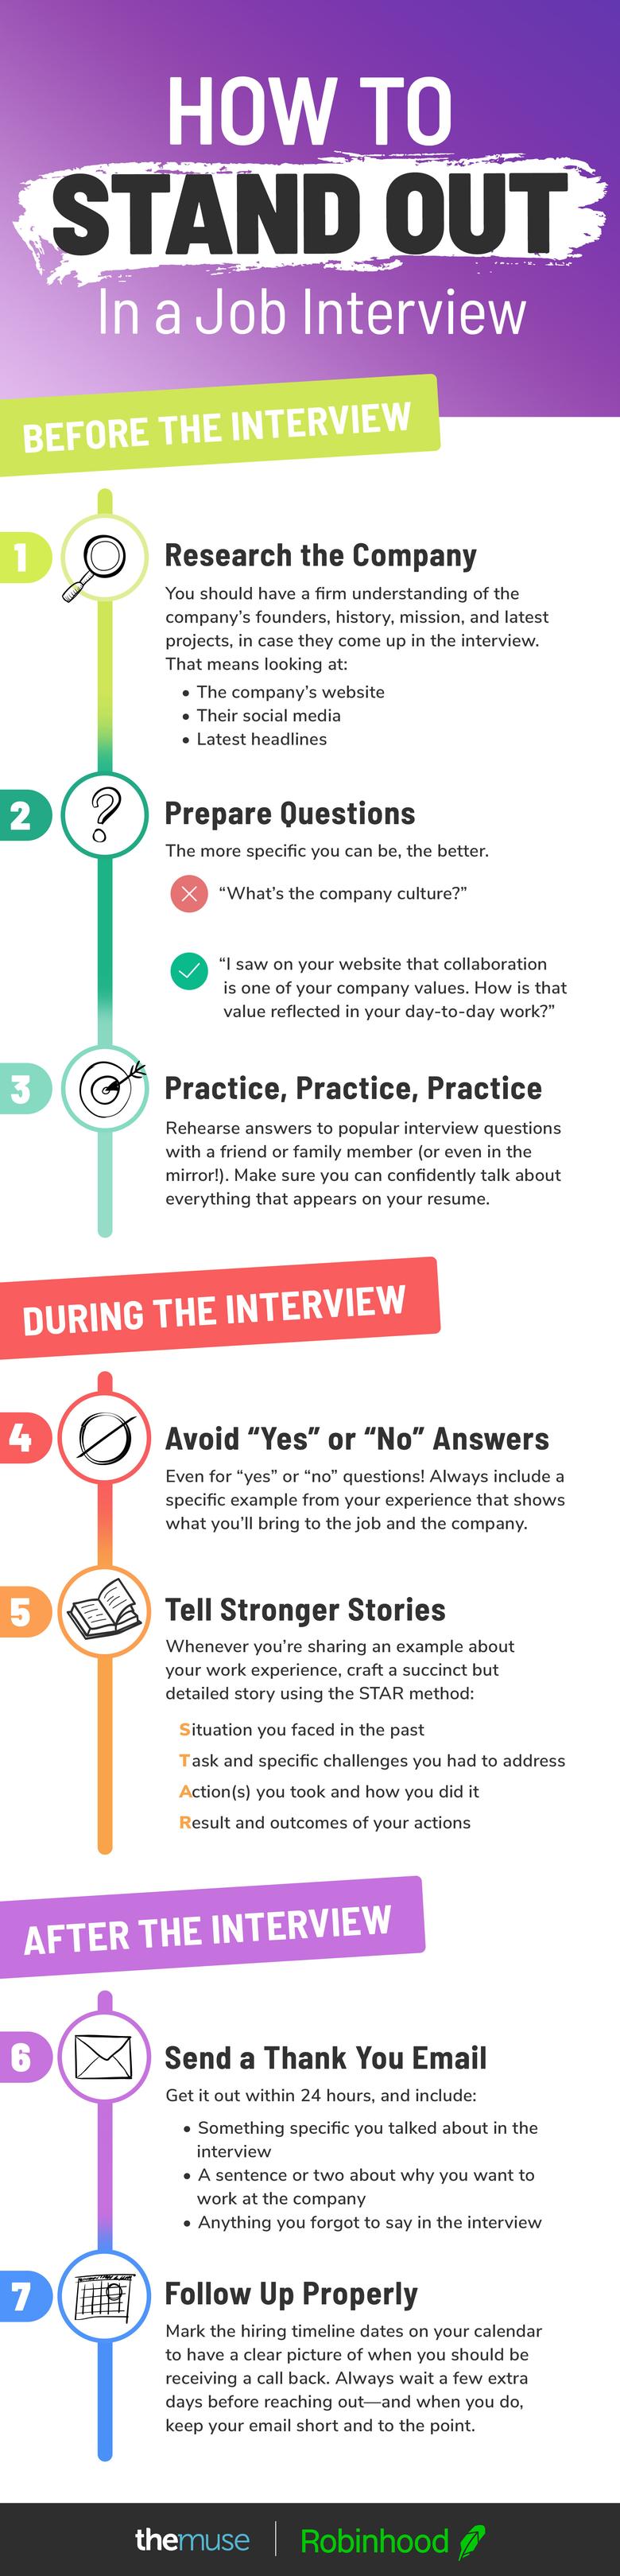 infographic about how to stand out in a job interview; full text in article